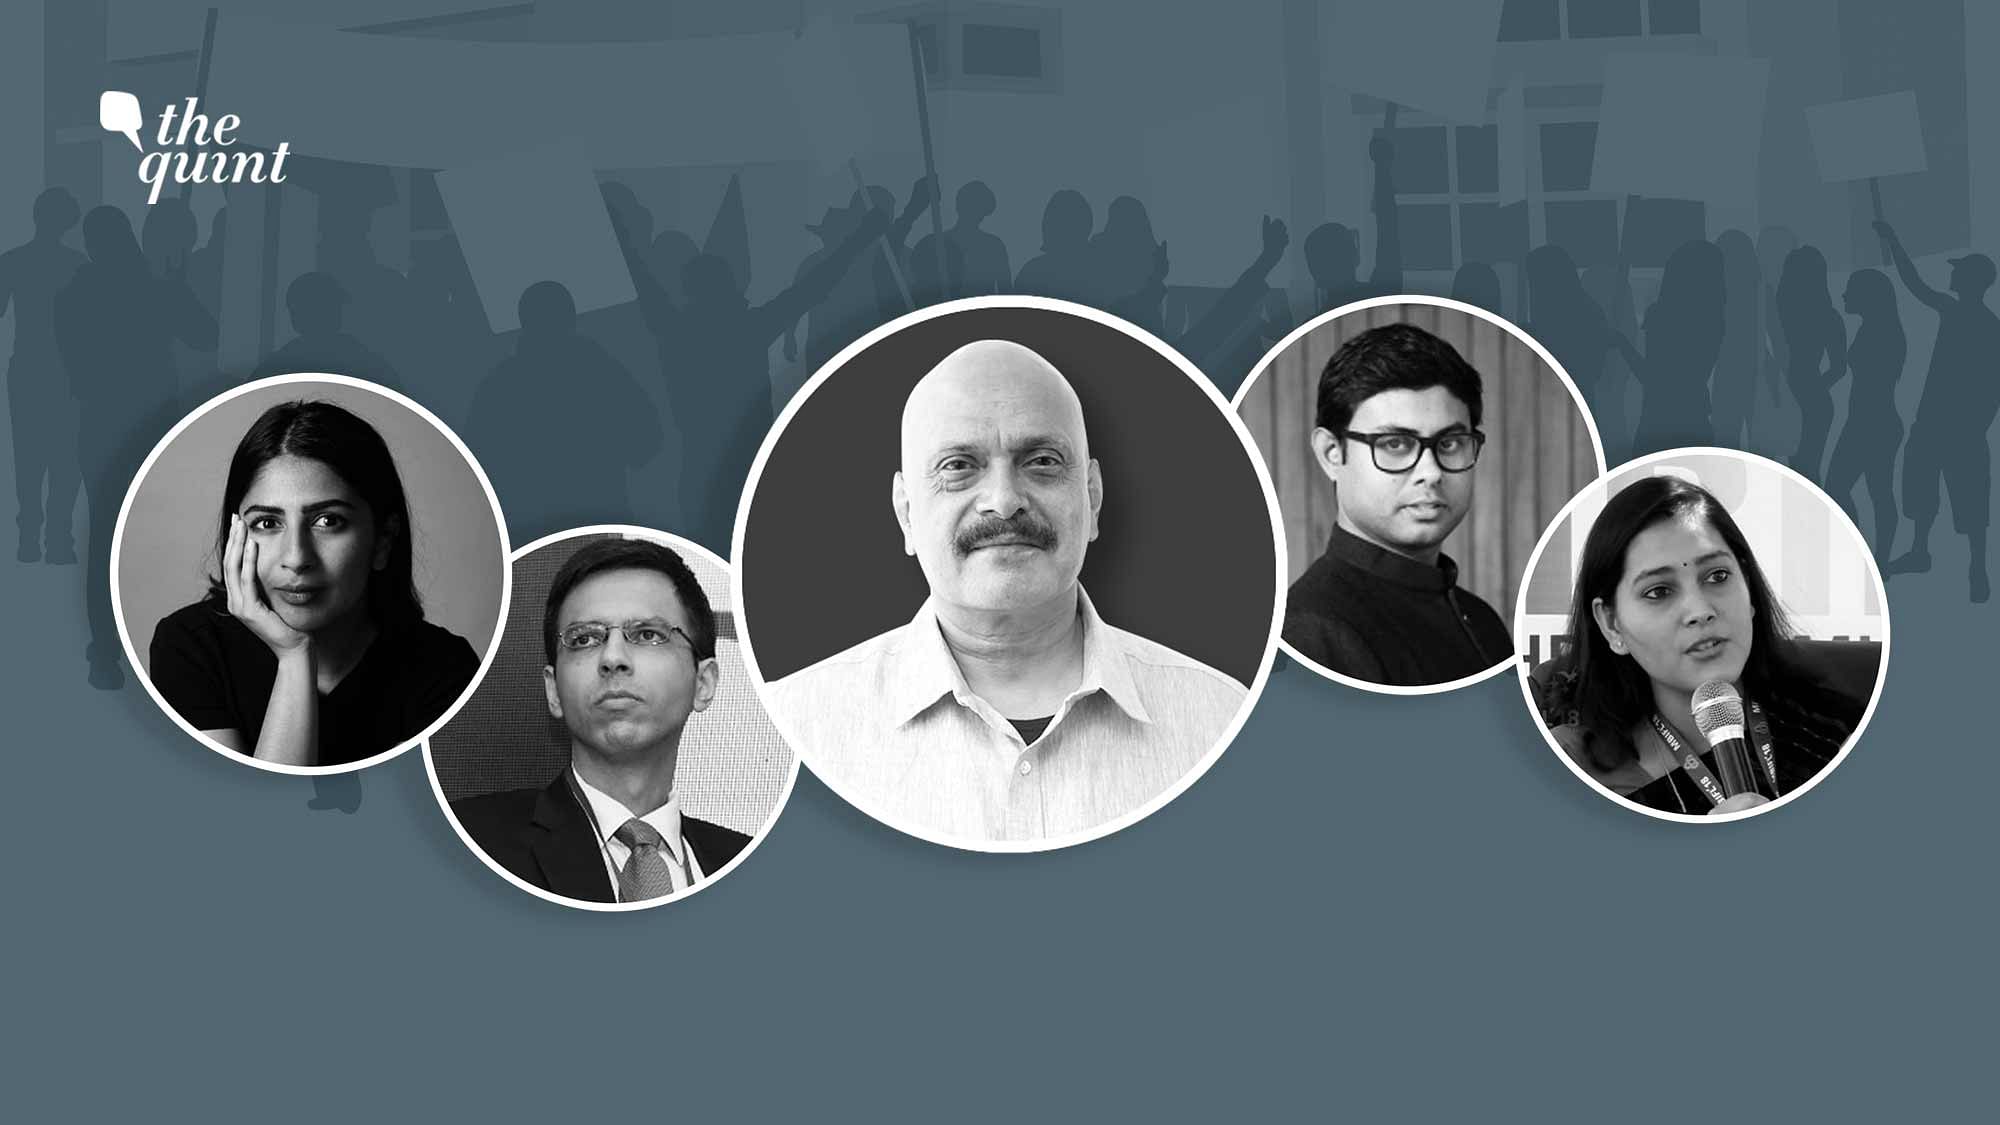 <div class="paragraphs"><p>The Quint's Editor-in-Chief Raghav Bahl chaired a debate on students' protests at The Mumbai LitFest.</p></div>